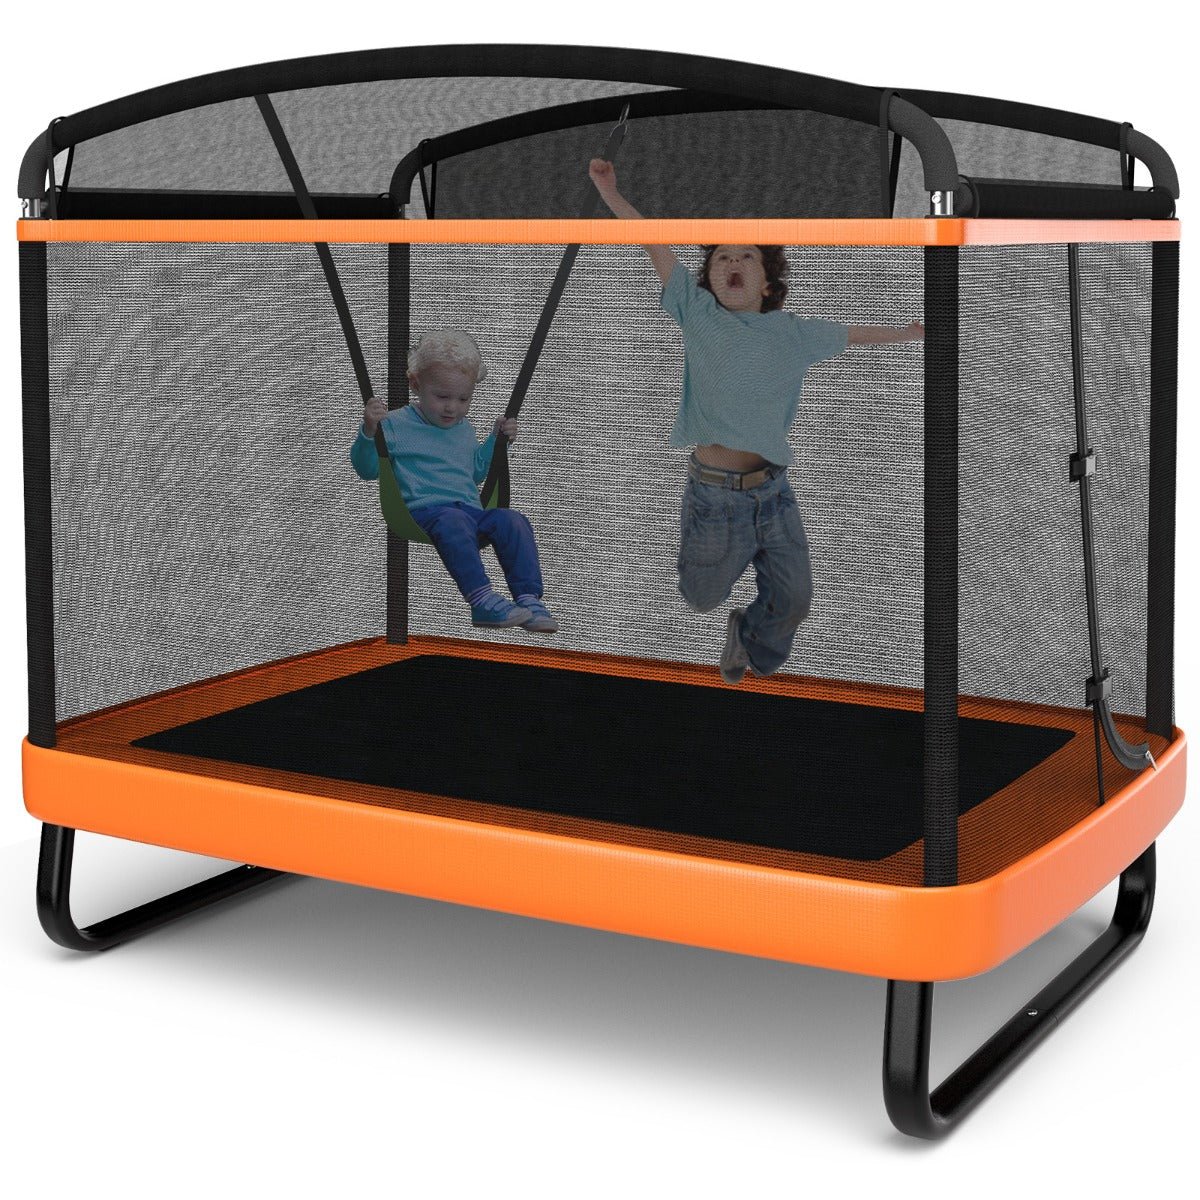 Healthy Playtime: 6 FT Recreational Trampoline with Swing for Kids